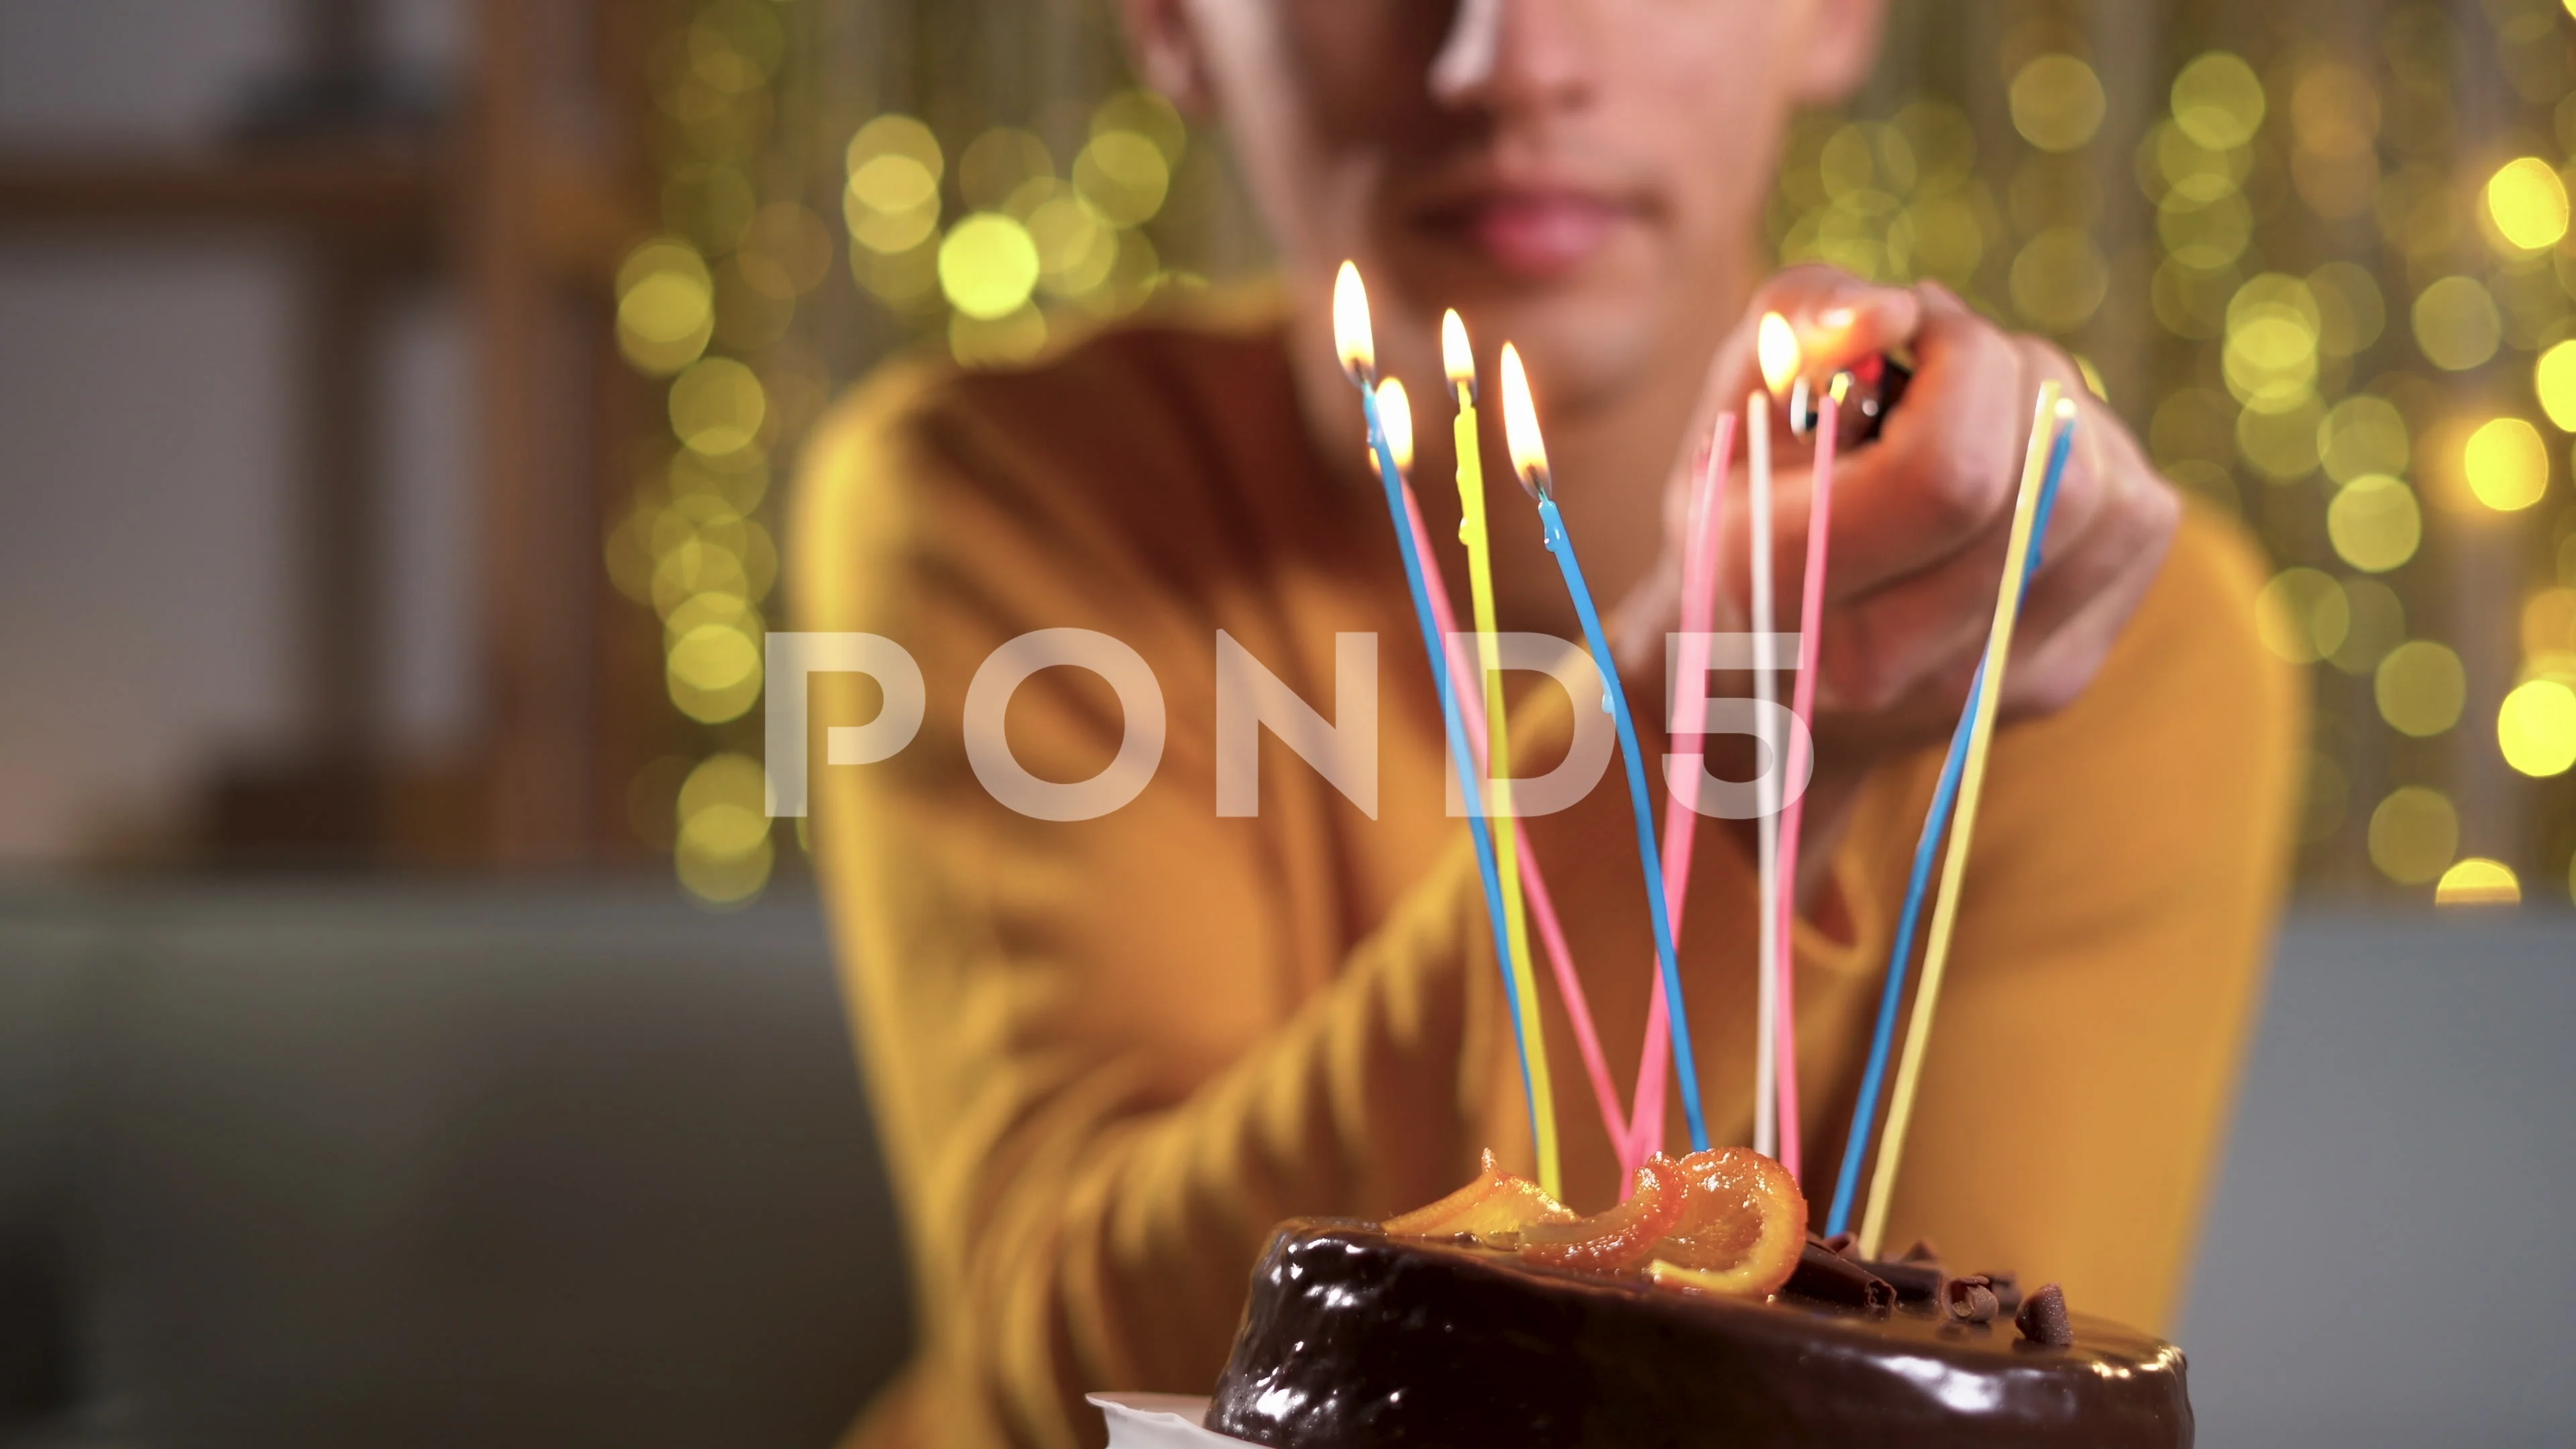 chocolate birthday cakes with candles for men